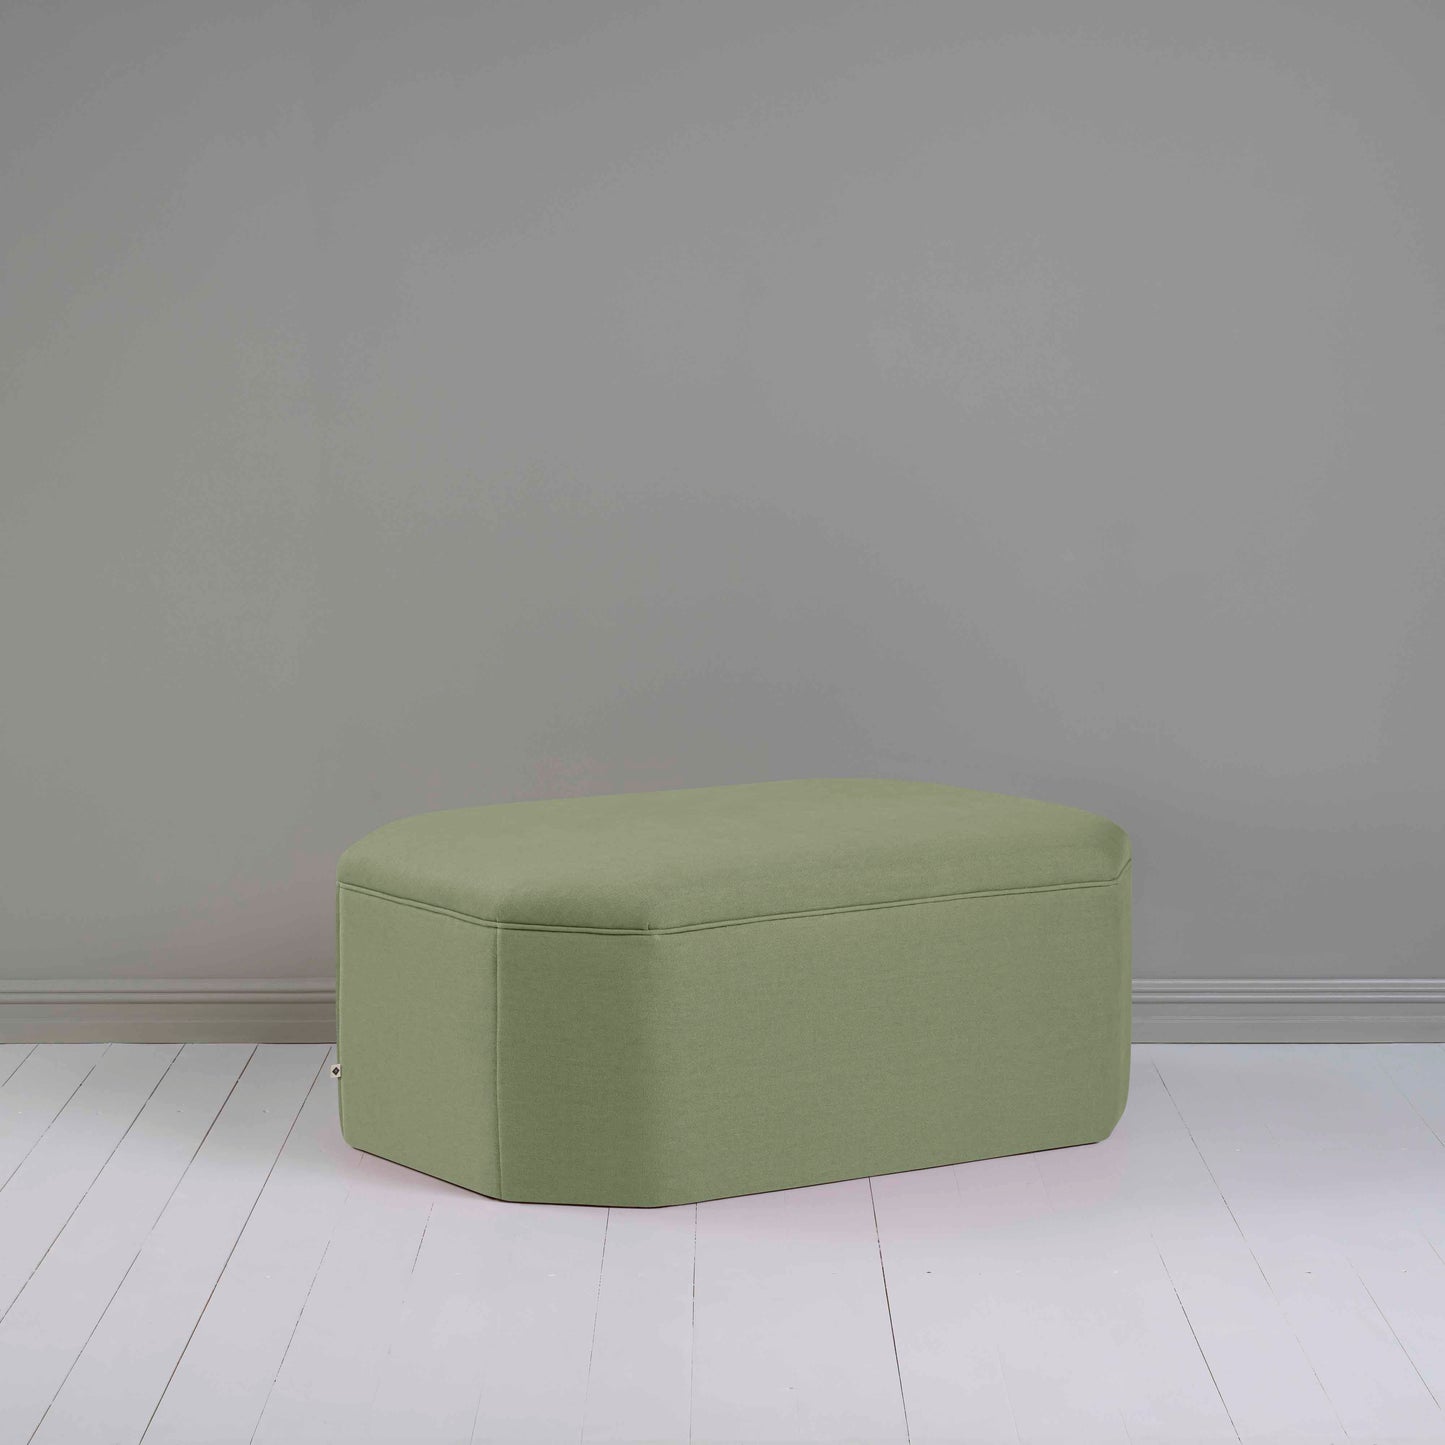 Hither Hexagonal Storage Ottoman in Laidback Linen Moss